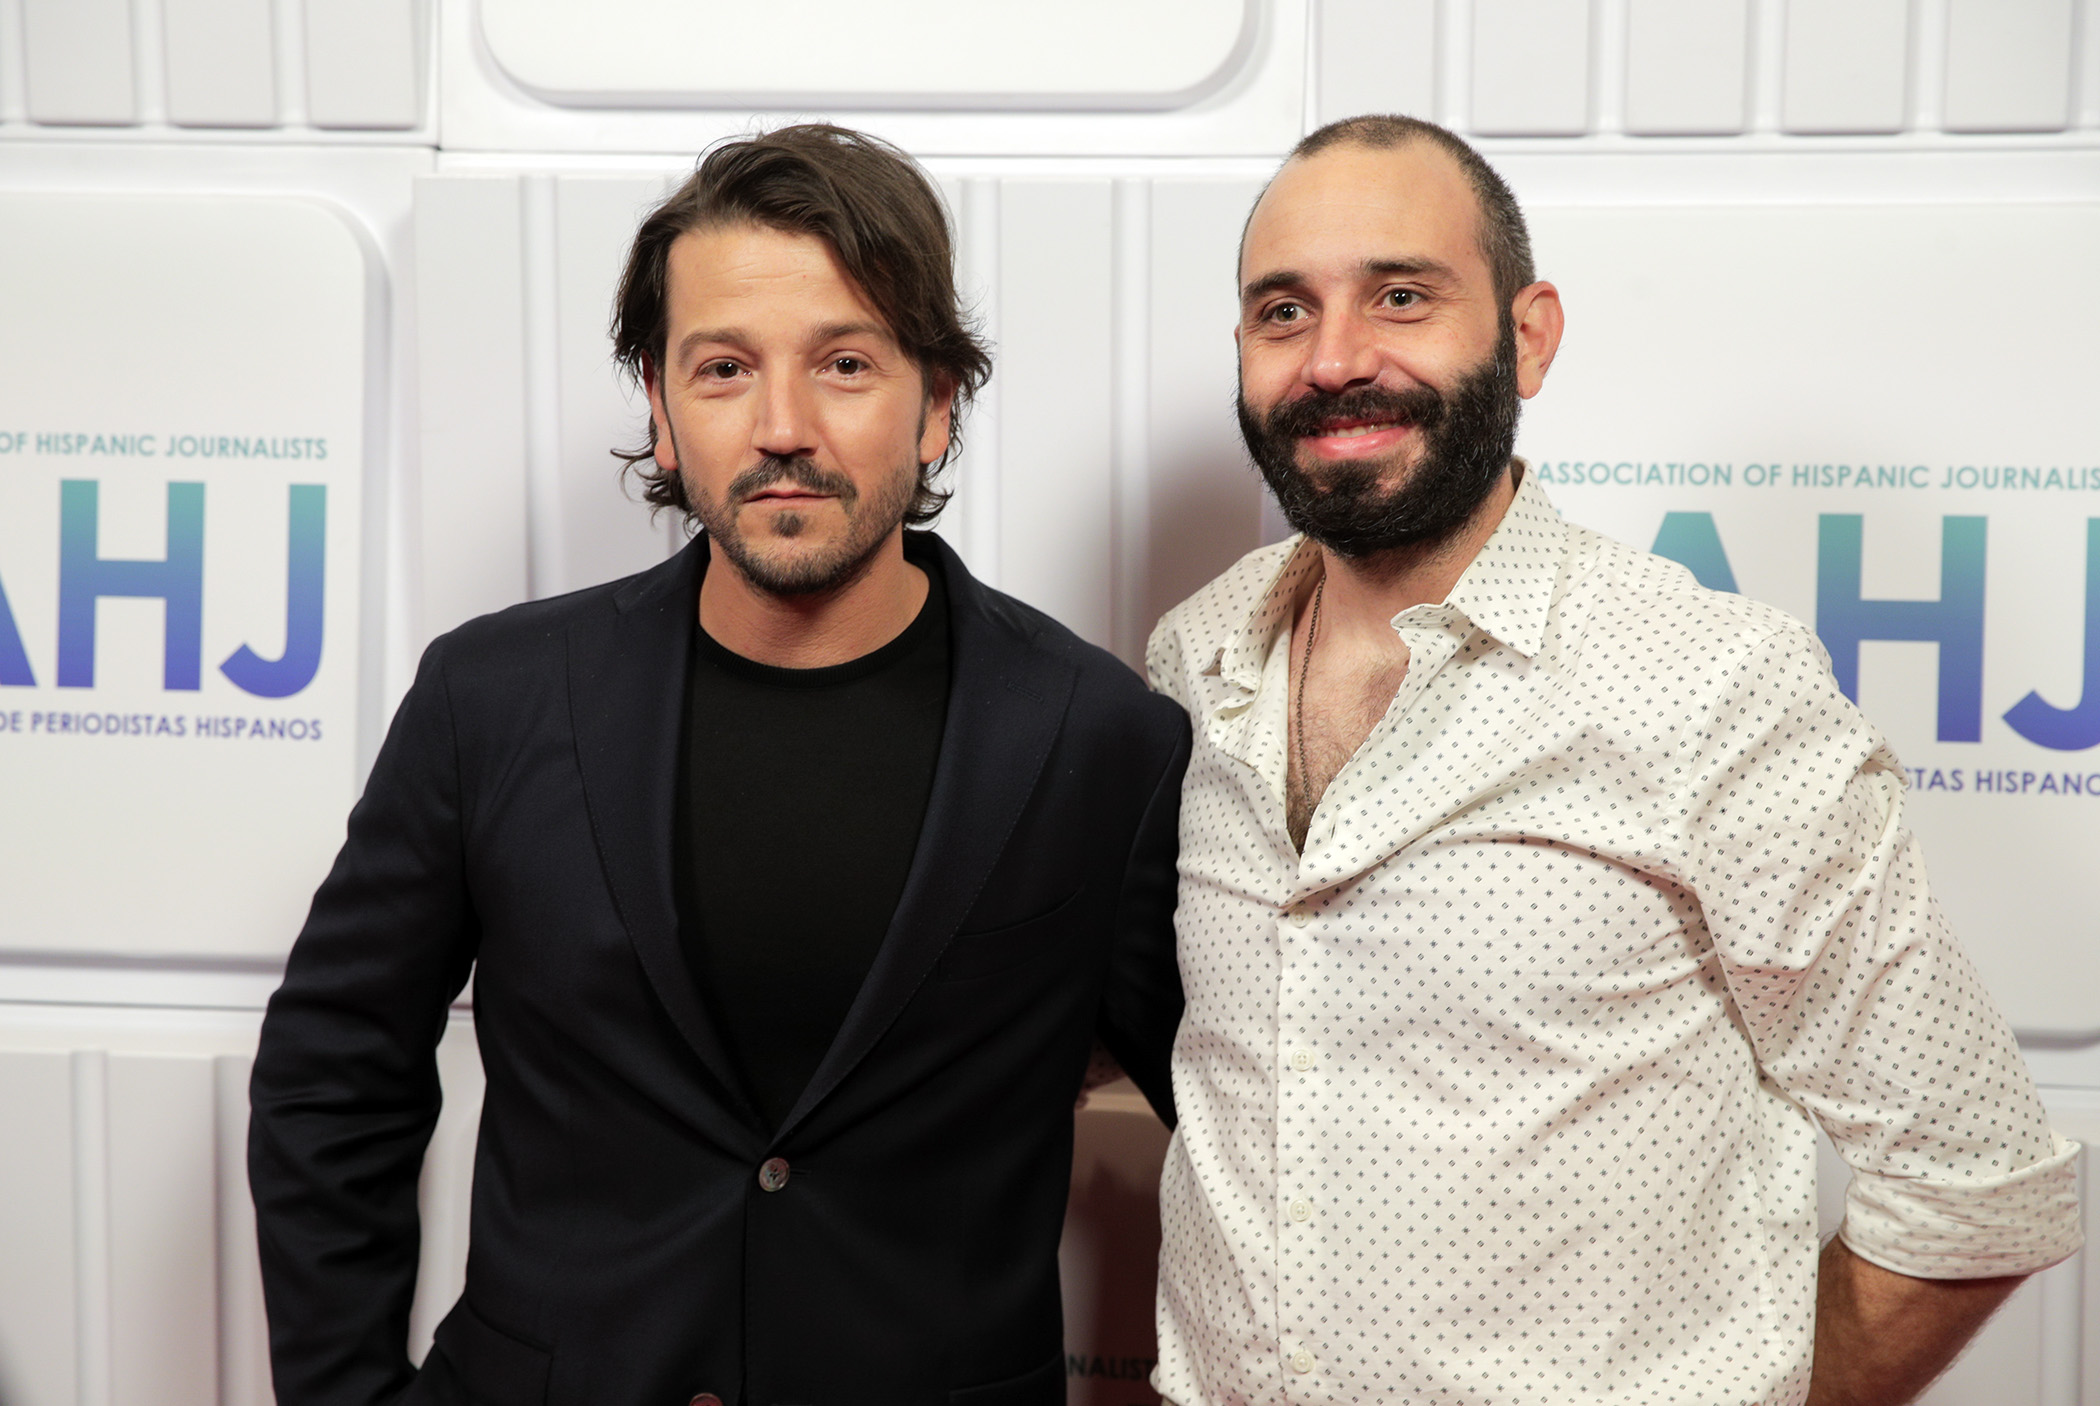 Actor Diego Luna, left, poses for a photo on the National Association of Hispanic Journalists Hall of Fame Gala red carpet in Las Vegas, Nev., on Saturday, August 5, 2022.